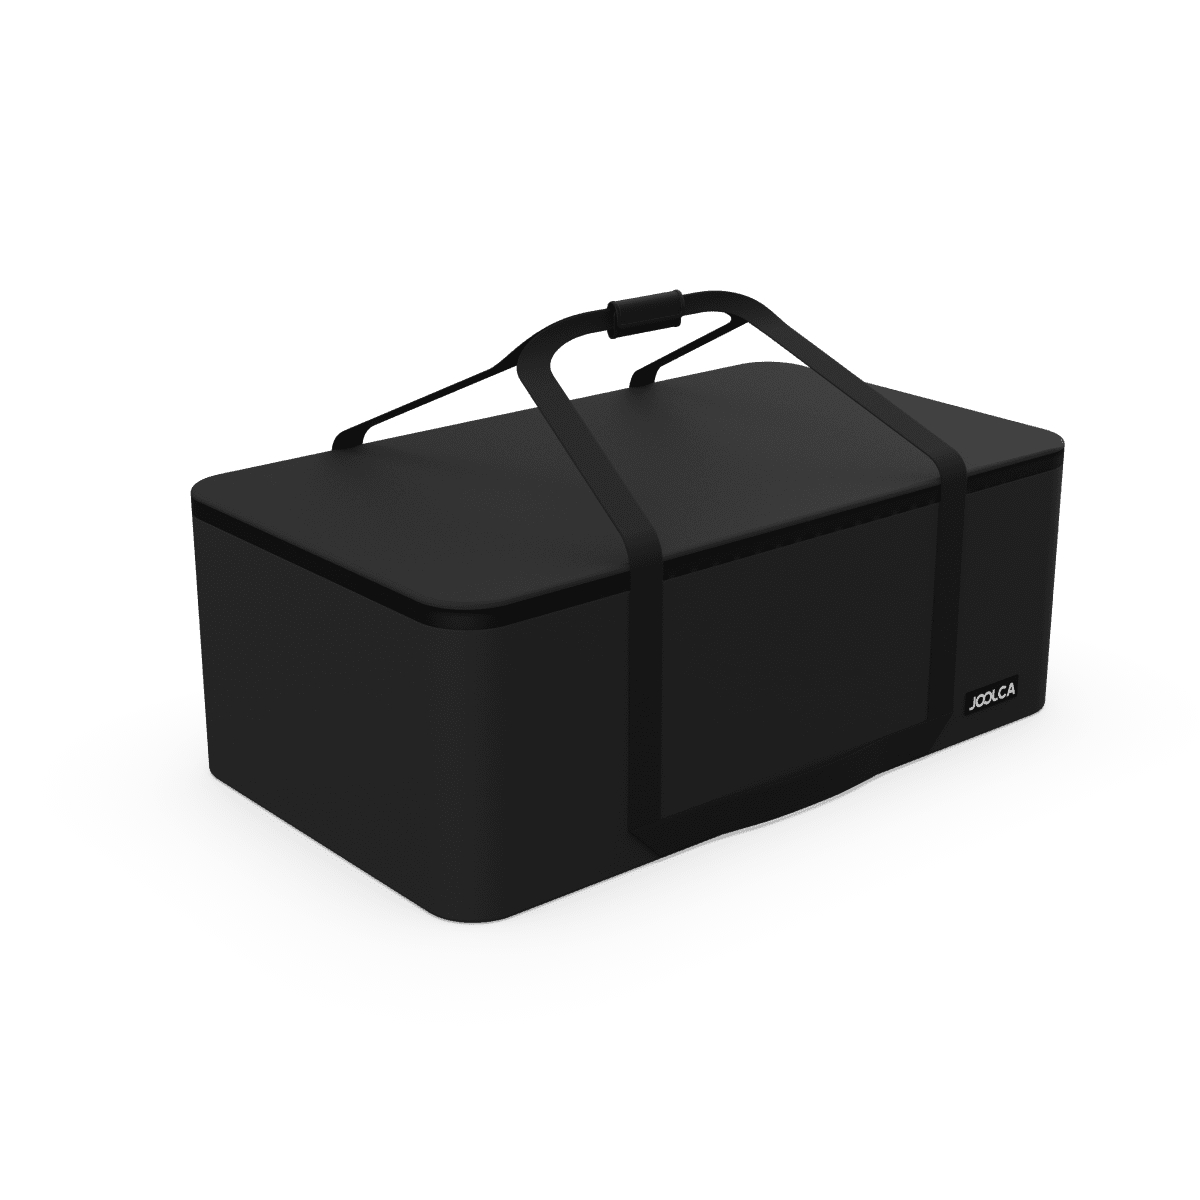 A large black carry bag for an inflatable hot tub